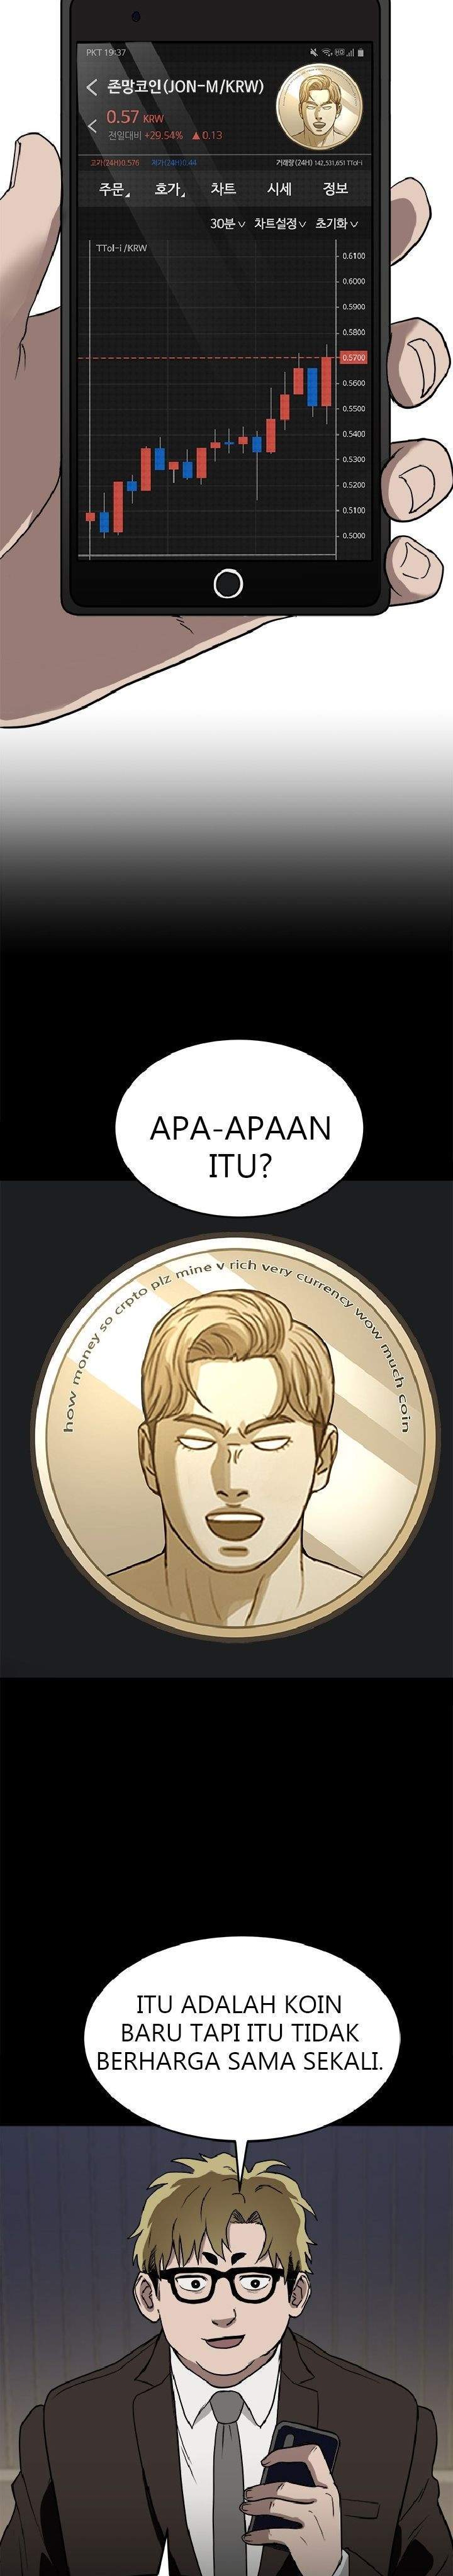 Fate Coin Chapter 1